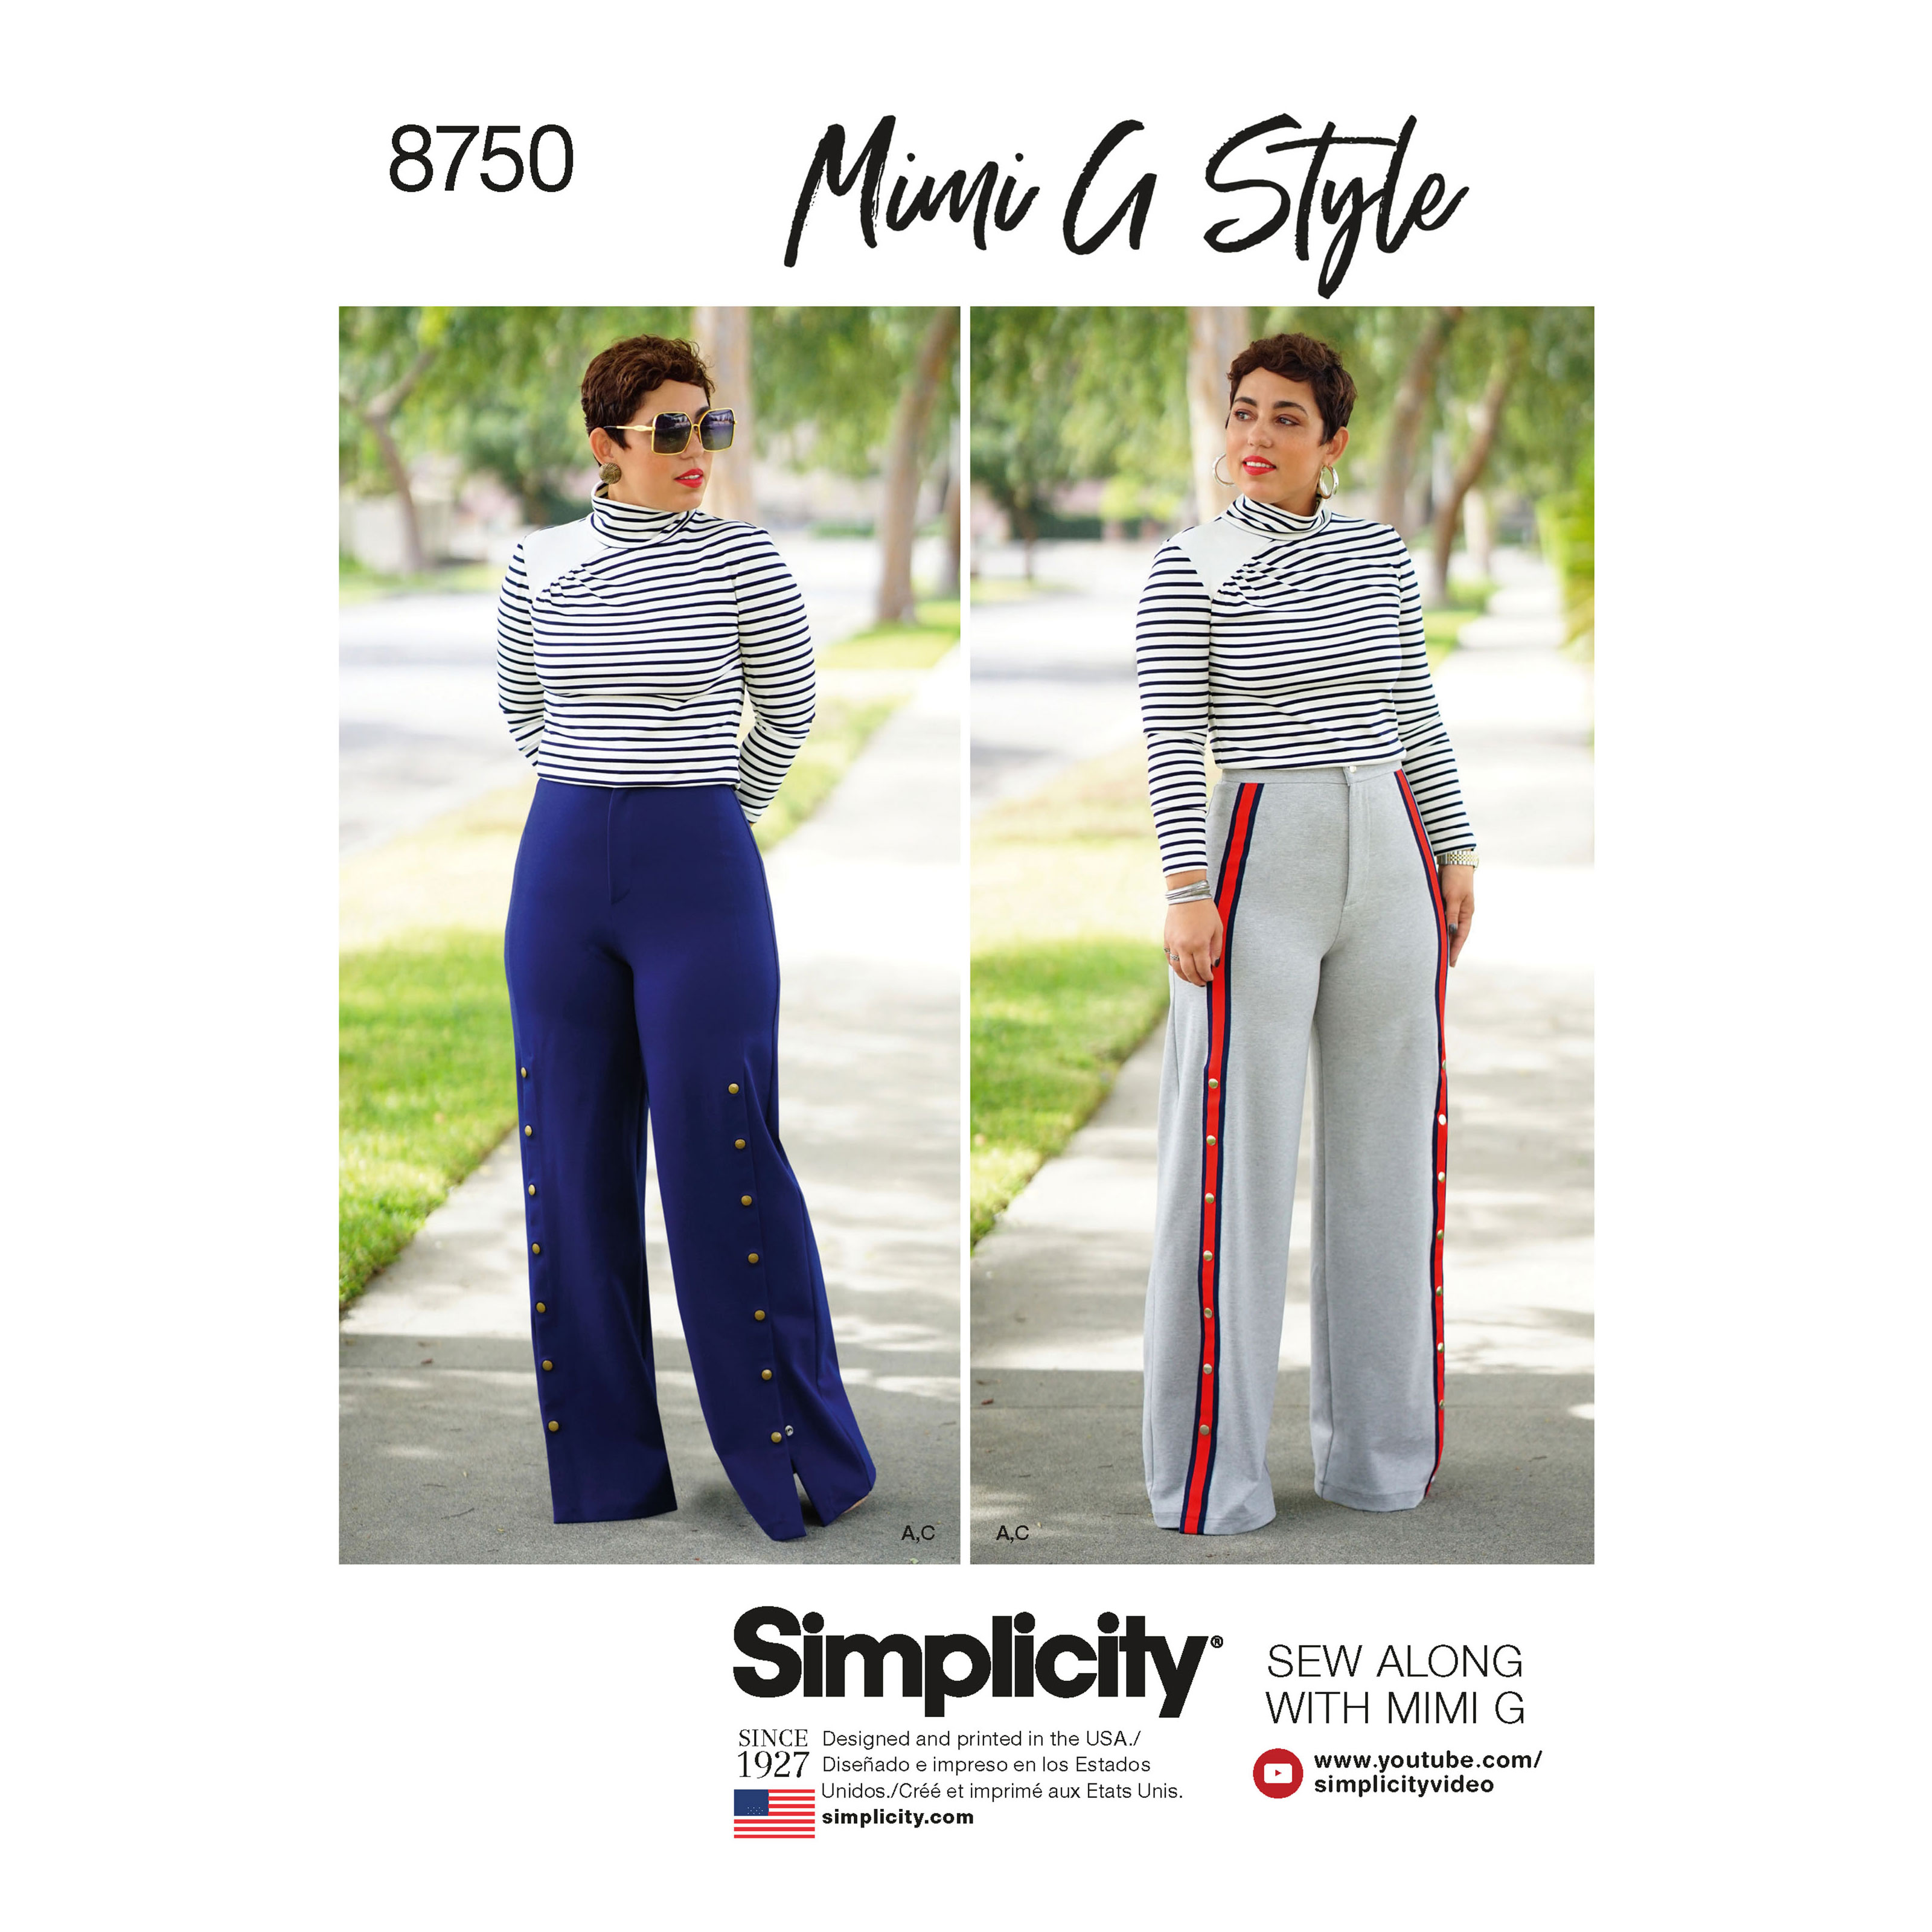 Womens Top and Wide Leg Trousers by Mimi G Style Simplicity Pattern 8750   Simplicity Sewing Patterns  wwwKL24ee